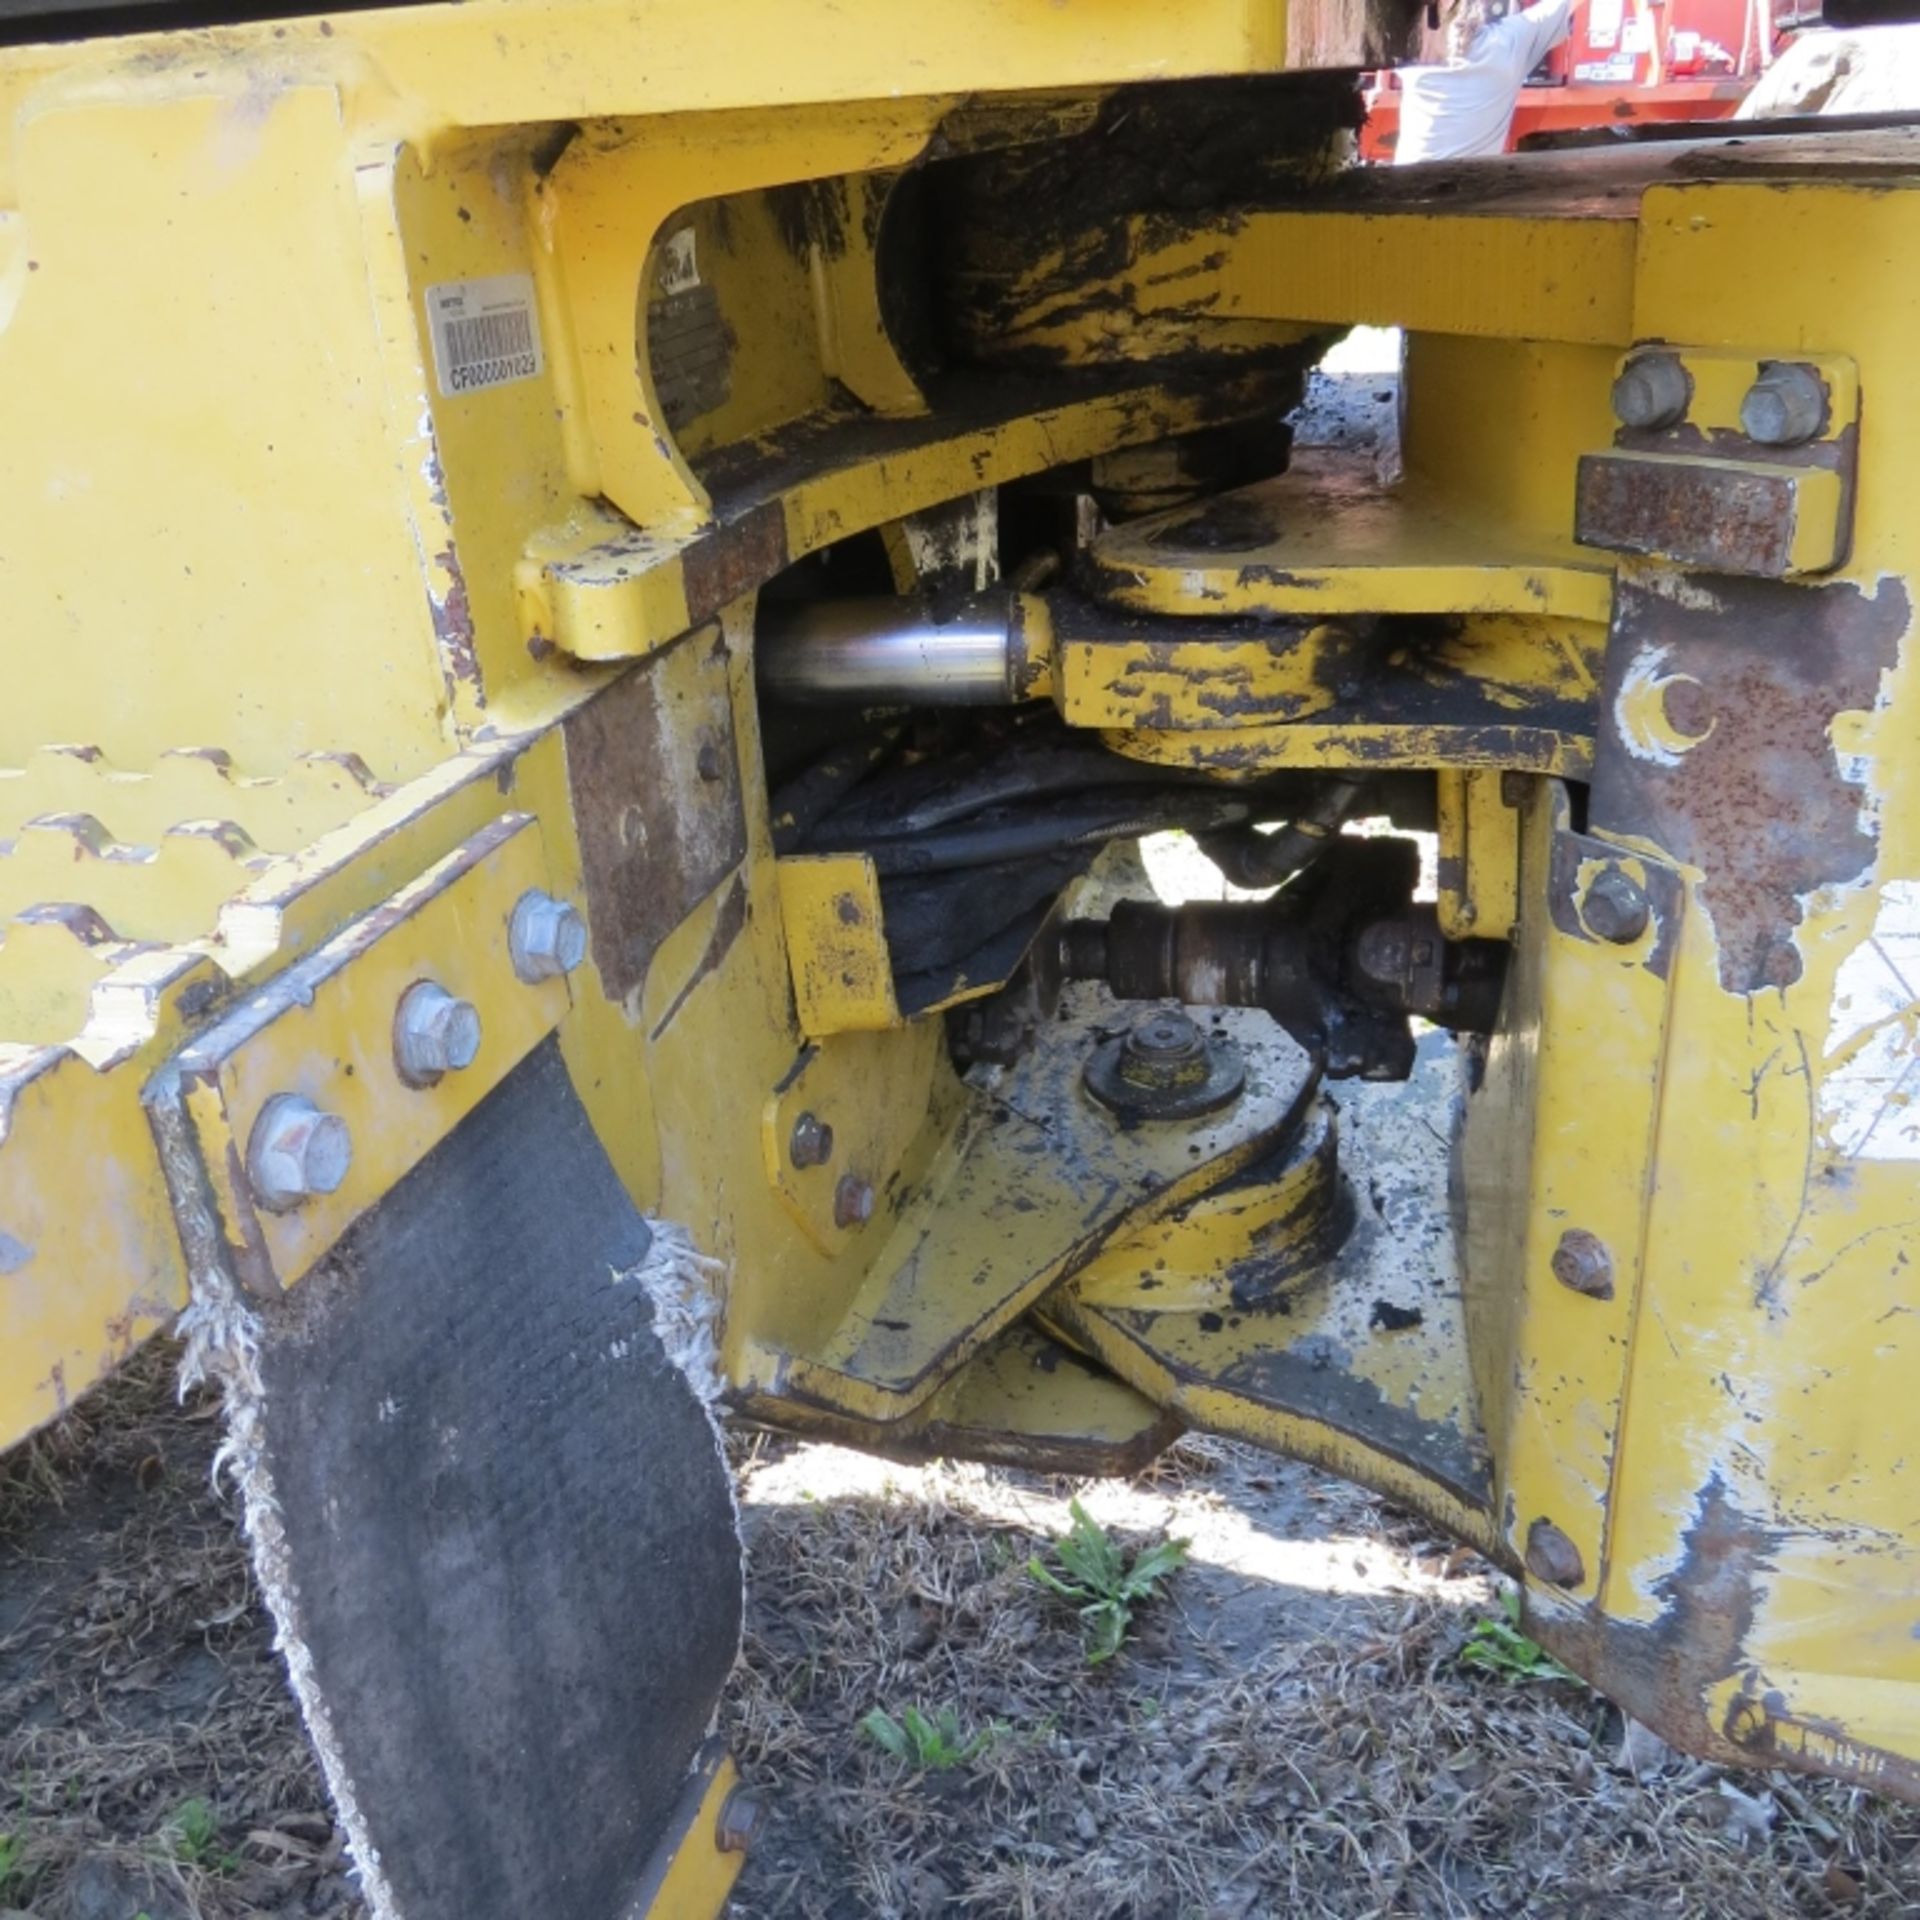 2007 CAT 553 Joystick Control SH-48 Sawhead & Side Pockets 6458 hours showing 28L-26 Tires S/N: - Image 14 of 18